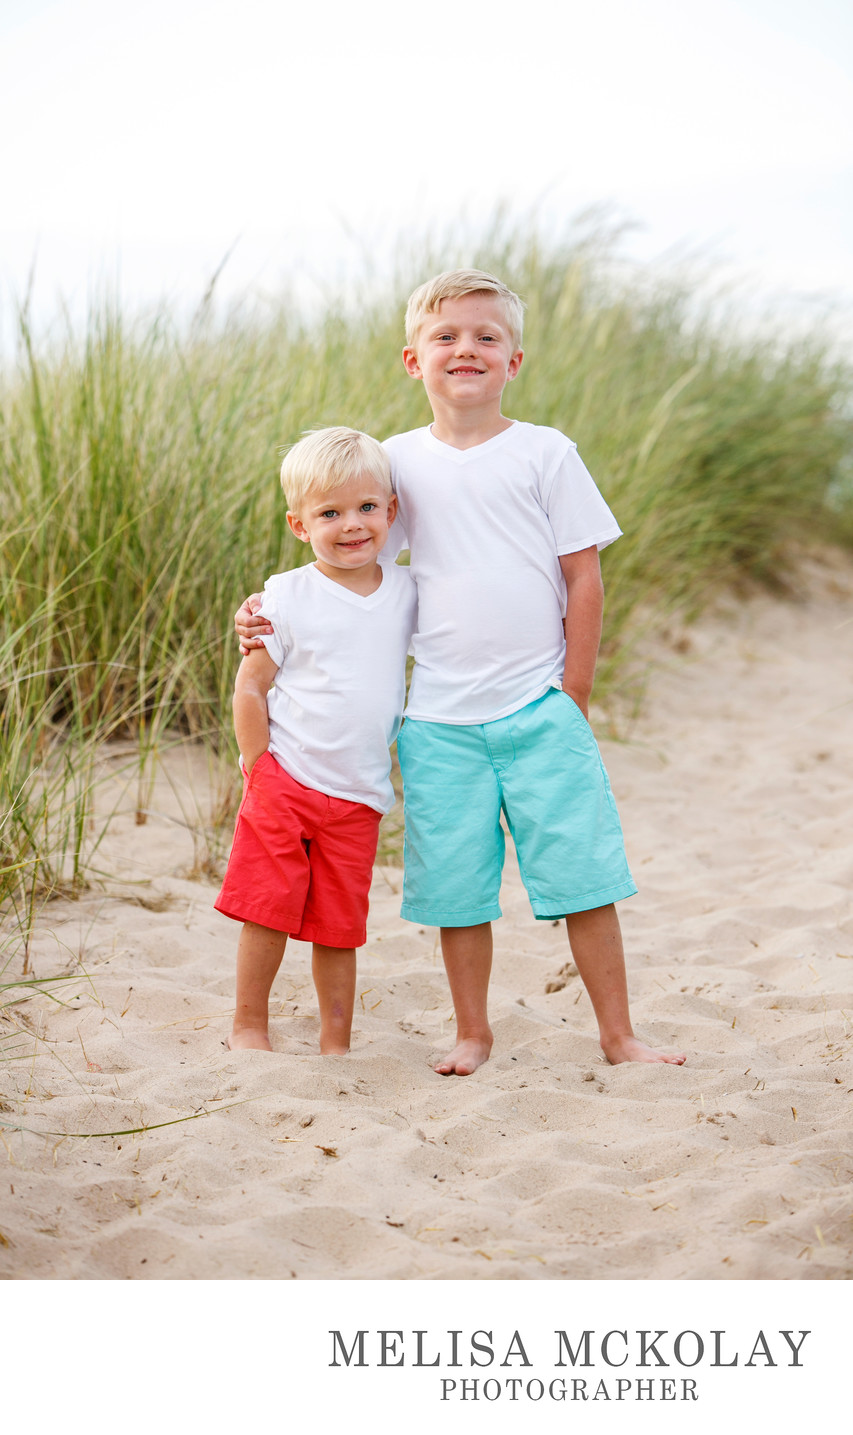 Handsome Boys | Brothers Portrait Photography | NMi 